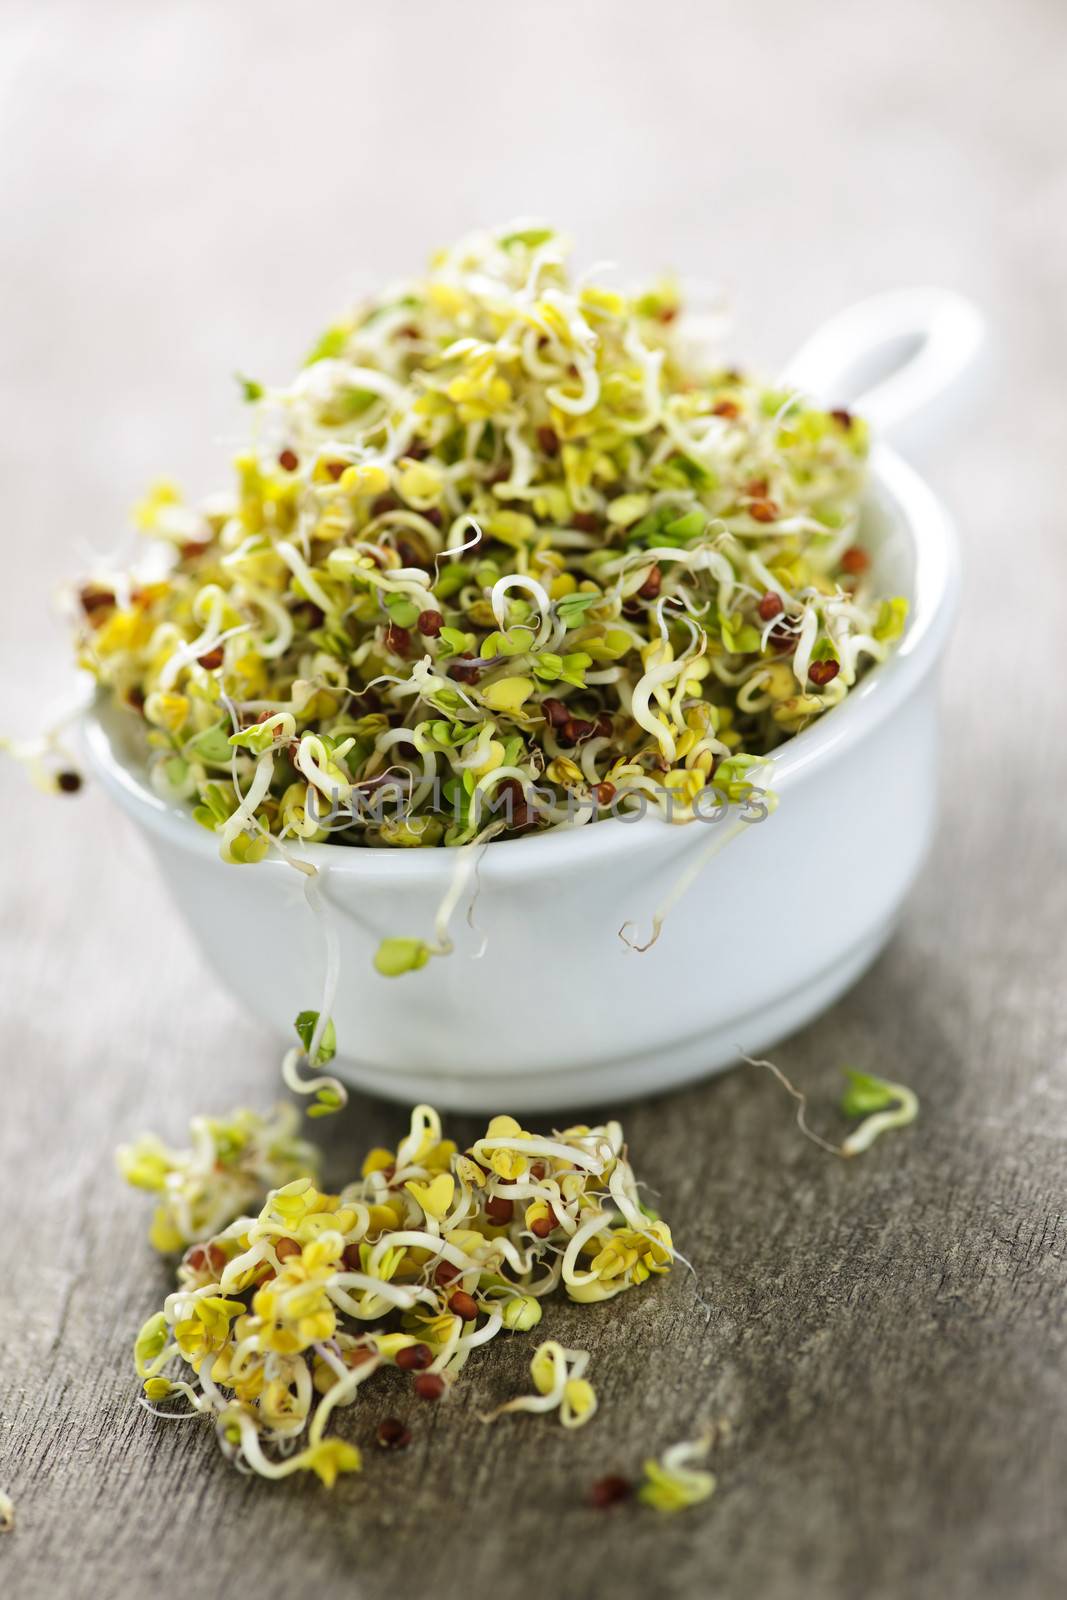 Alfalfa sprouts in a cup by elenathewise